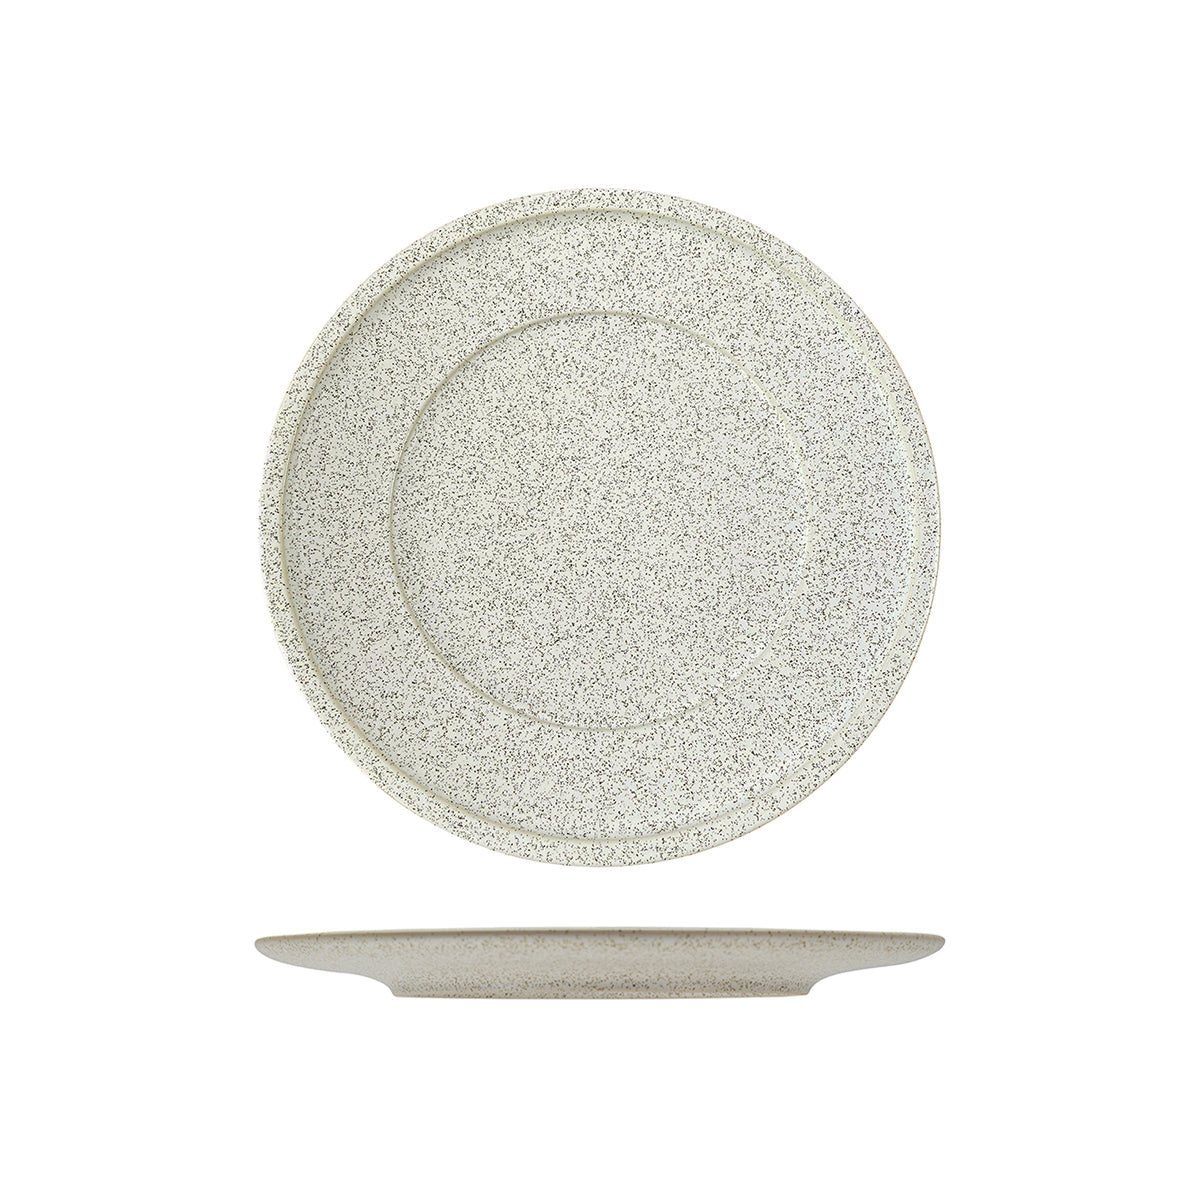 Flat Plate - 280mm, Ease Clay